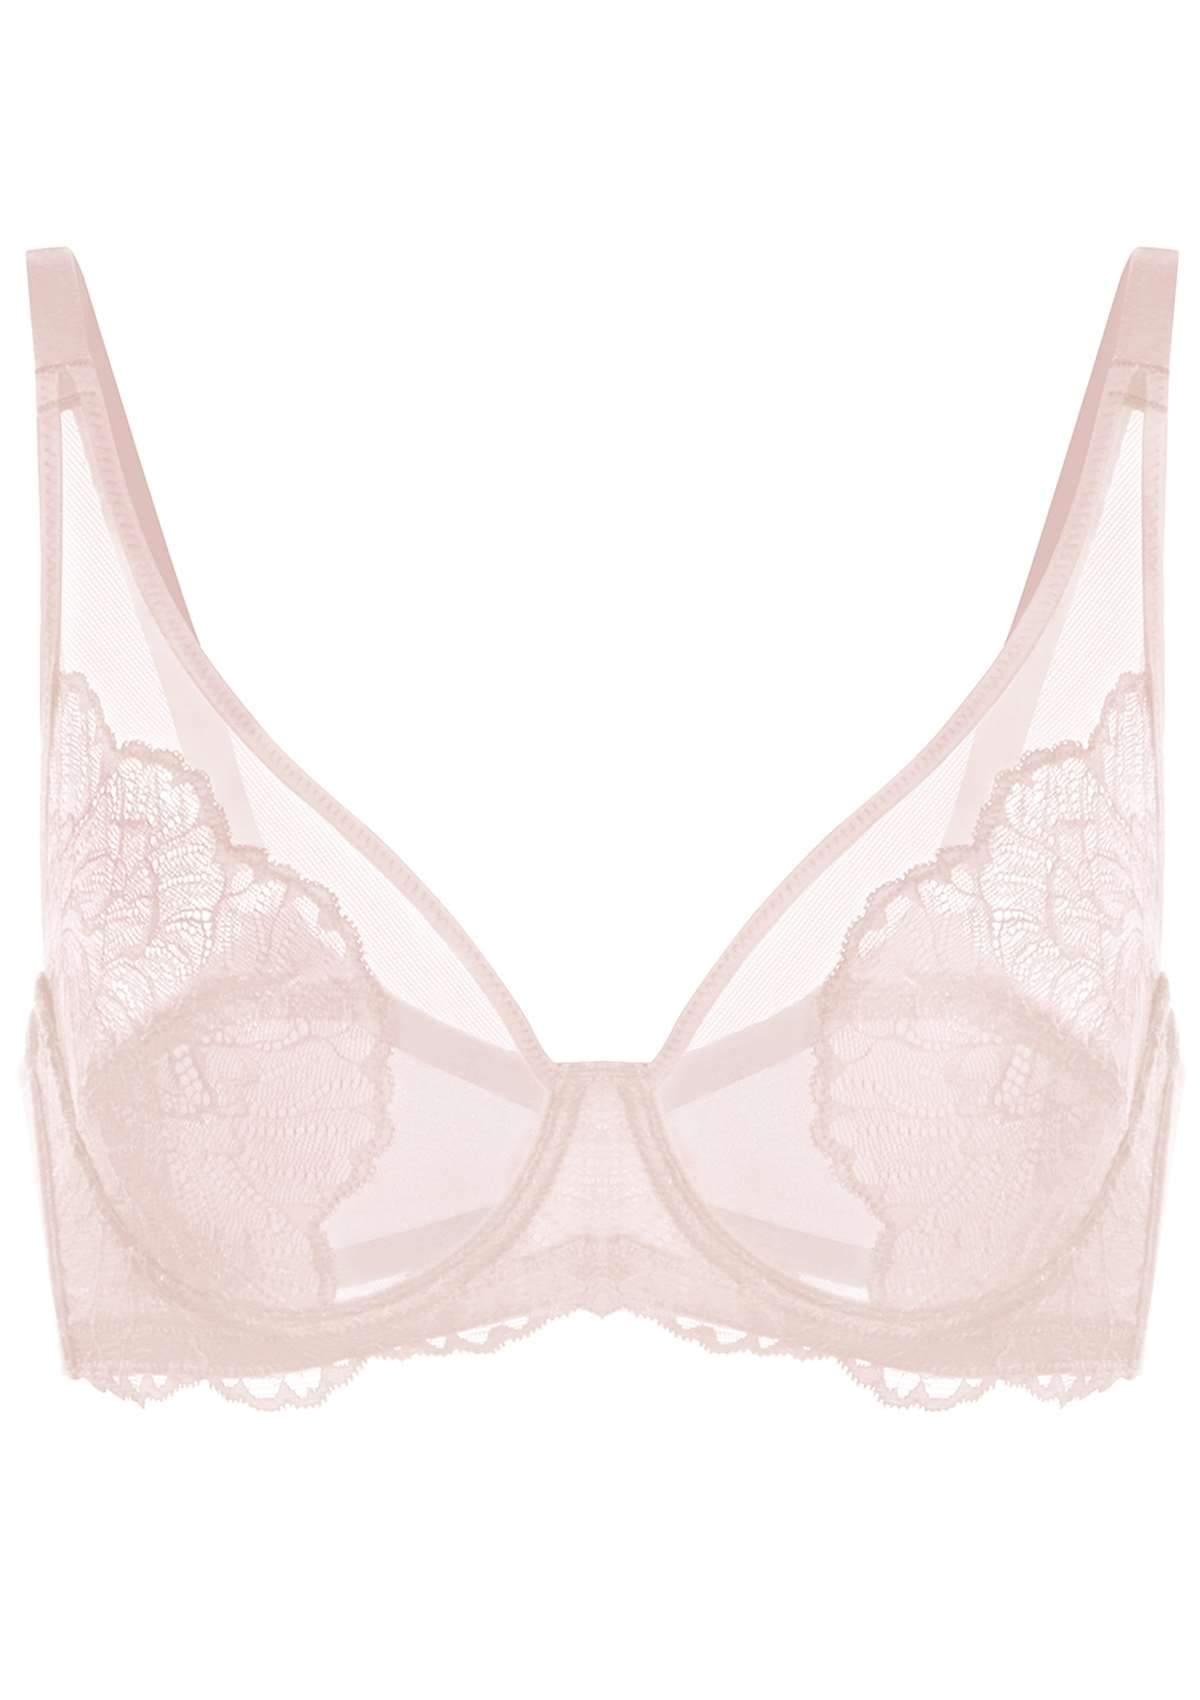 HSIA Blossom Lace Bra And Panties Set: Best Bra For Large Busts - Dark Pink / 34 / H